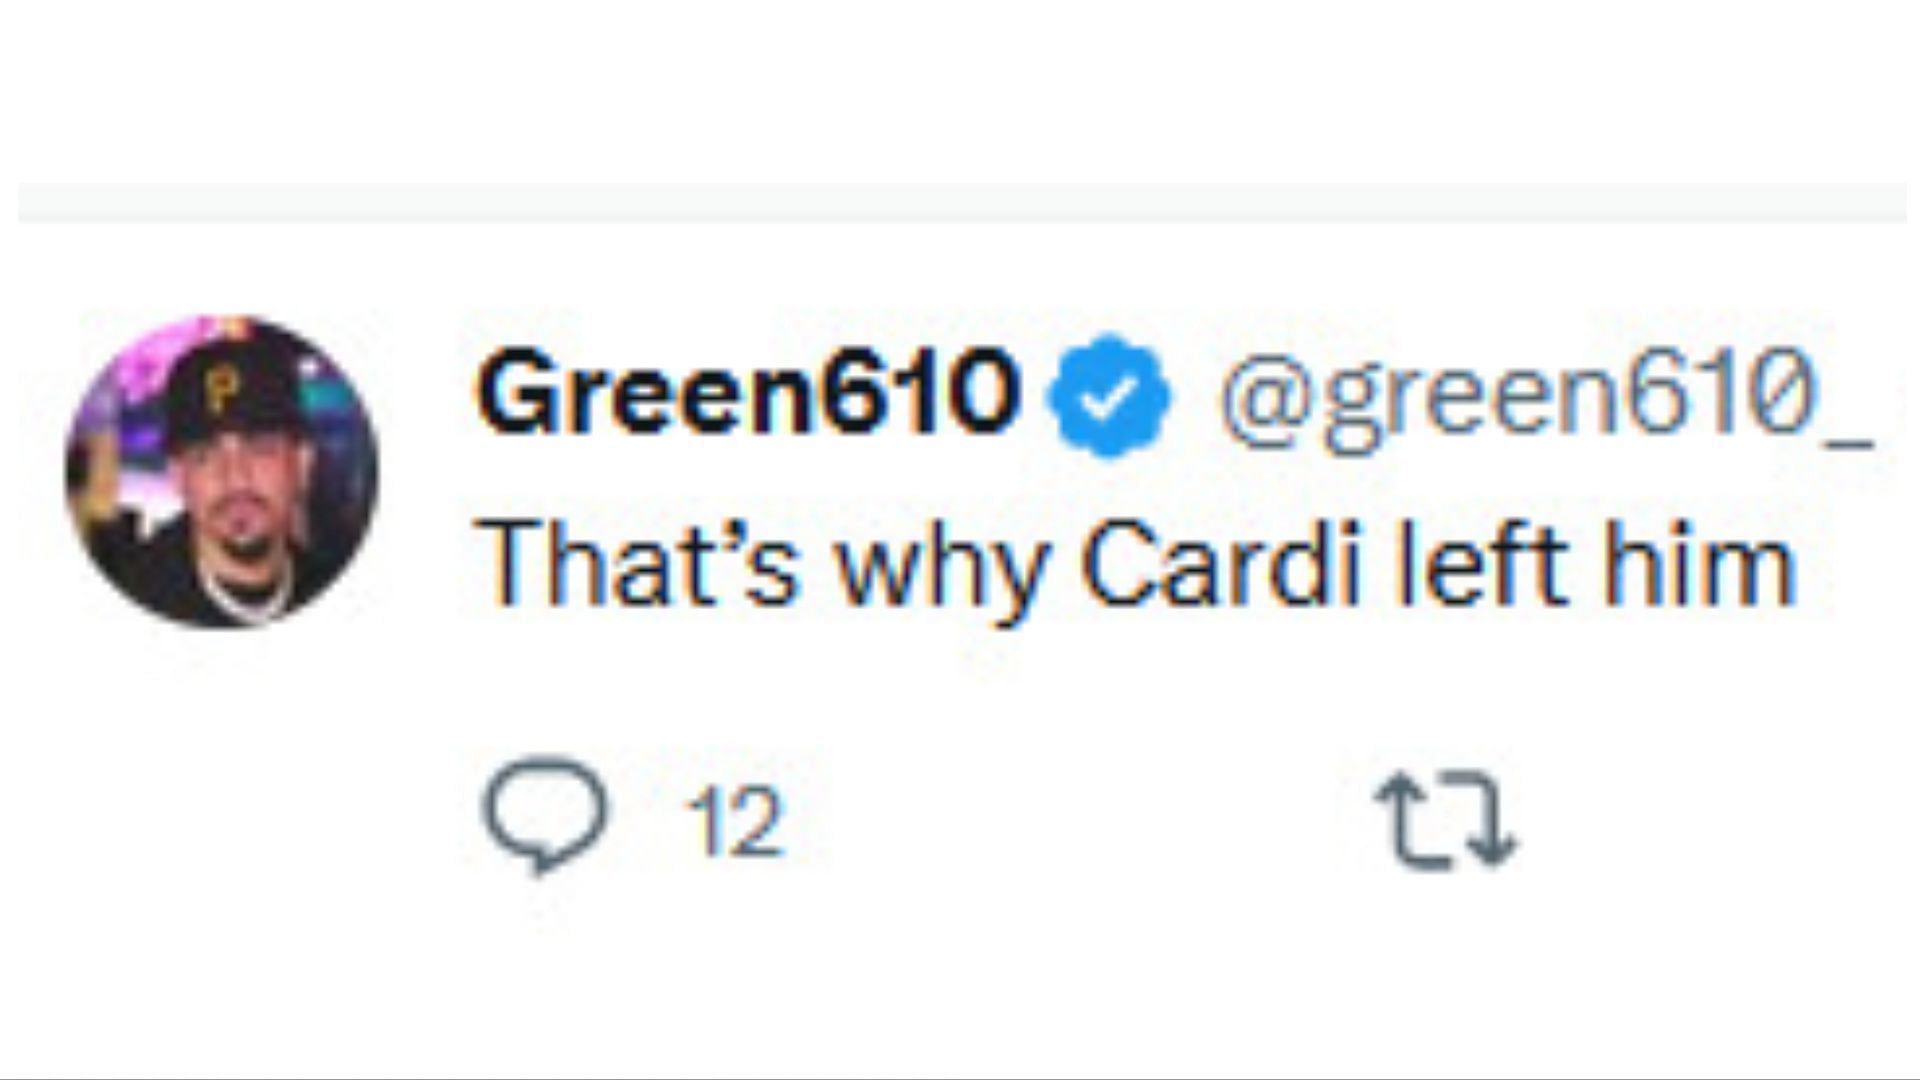 Netizens react as Blueface accused the Fans singer of cheating on Cardi B (Image via X / @green61θ_)